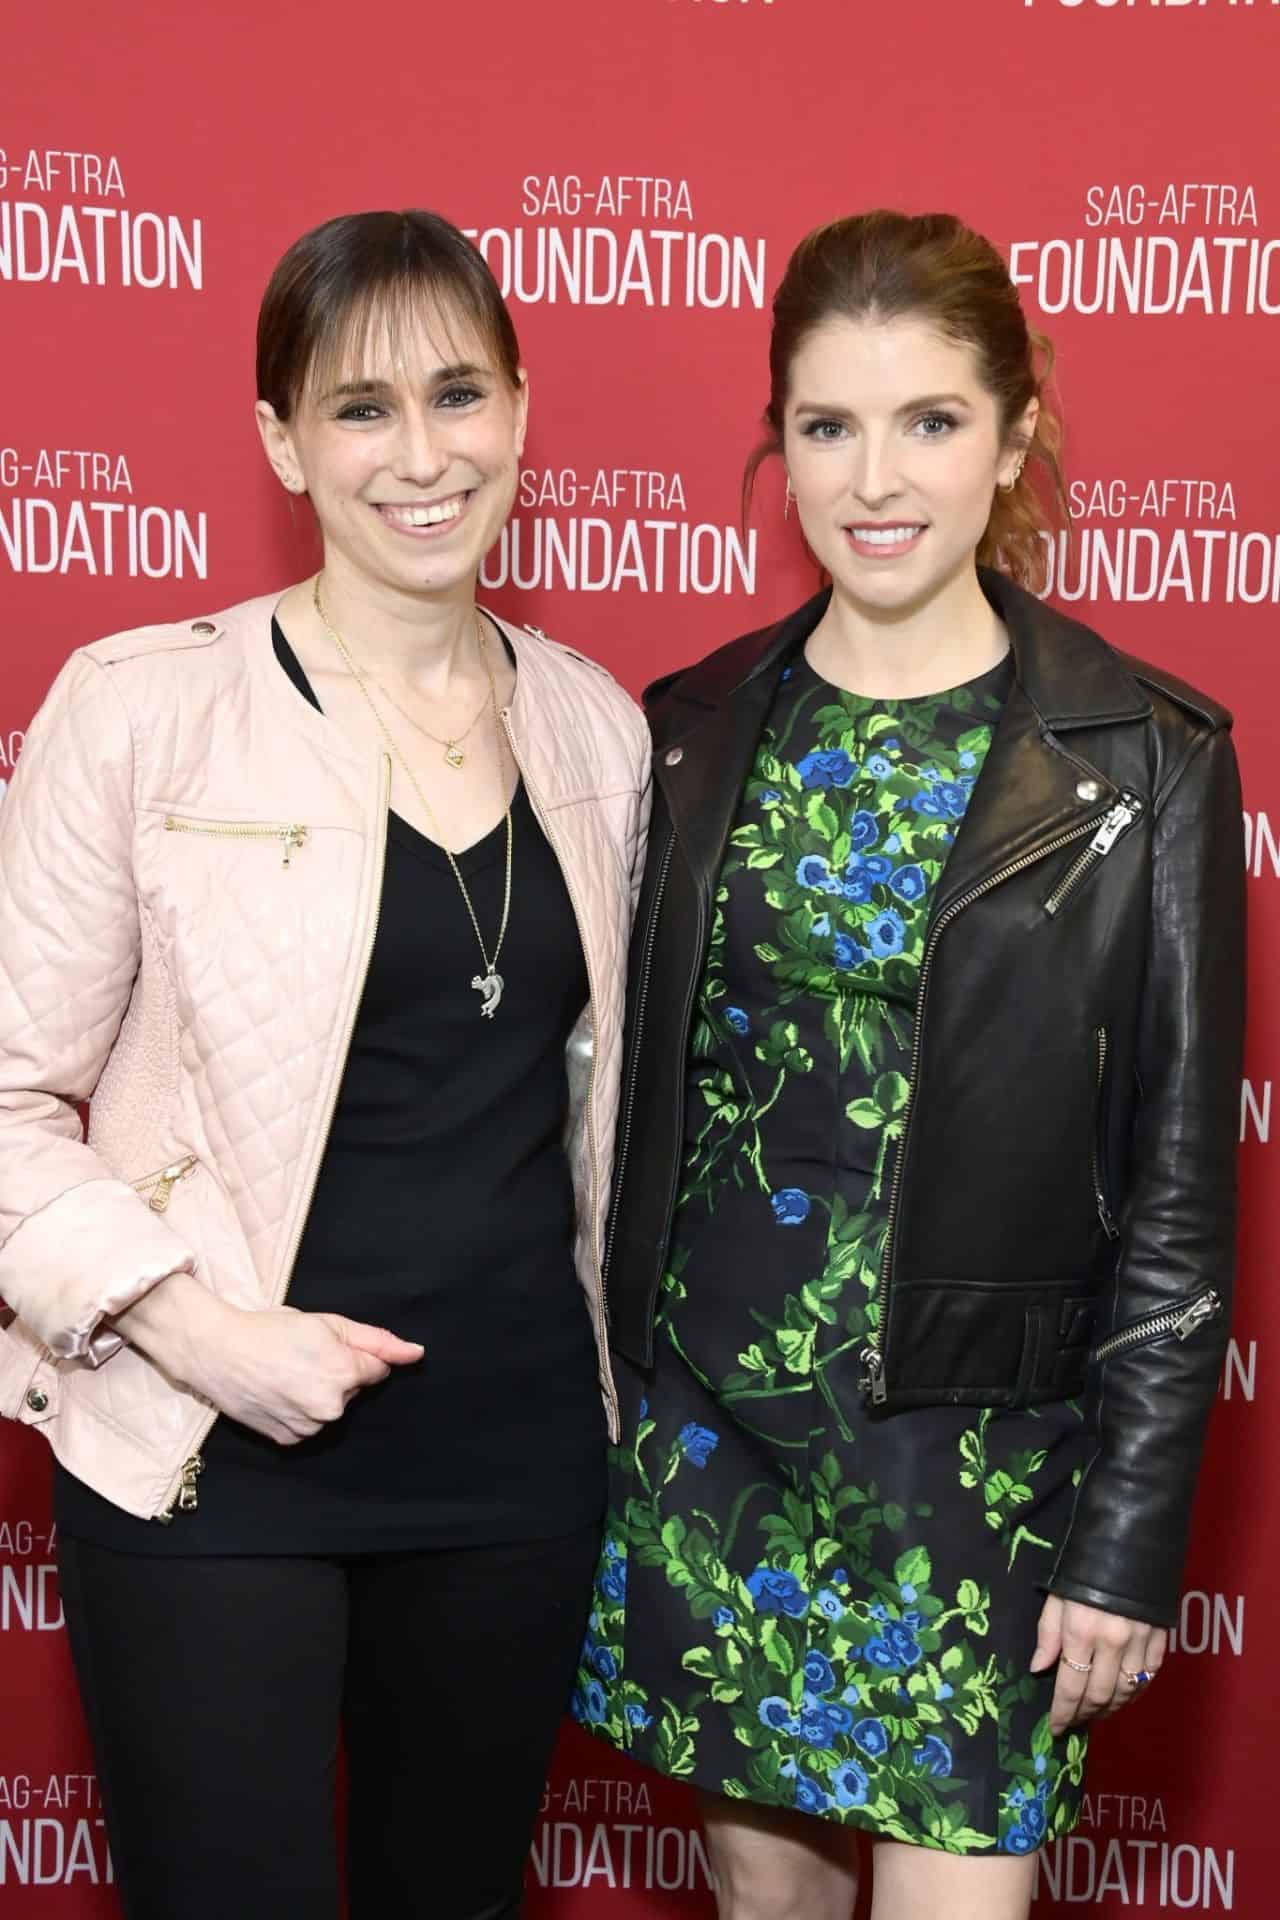 Anna Kendrick Looks Chic in a Vibrant Floral Dress at the SAG-AFTRA Event